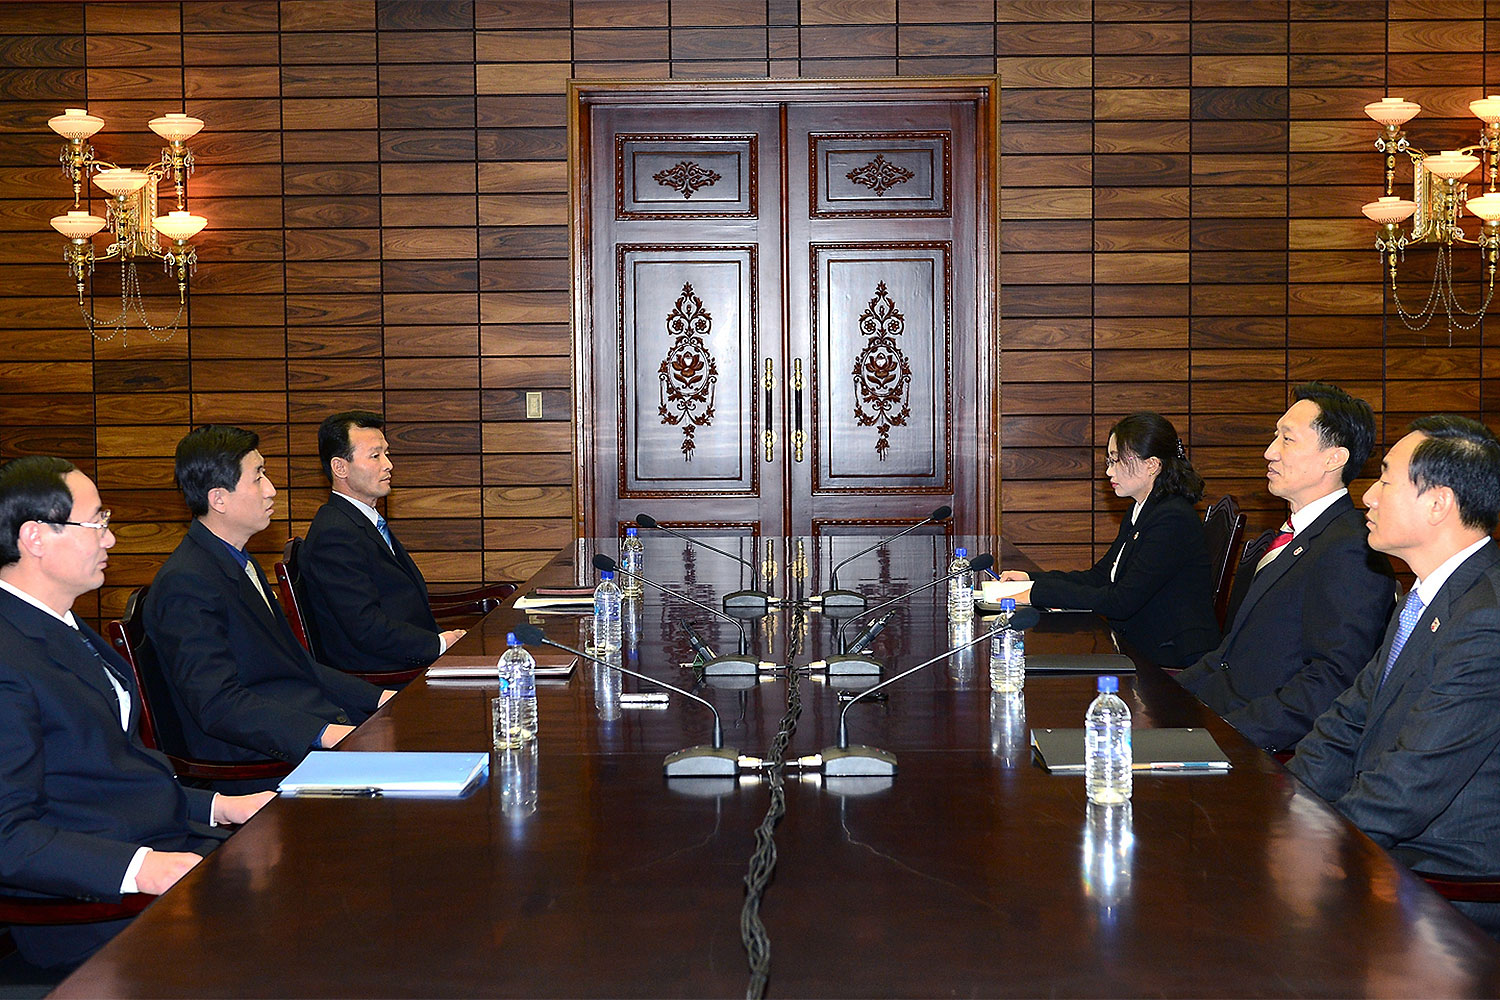 In this handout provided by South Korean Unification Ministry, Lee Duk-Haeng (R, Center), the head of South Korea's working-level delegation to family reunion talks with his North Korean counterpart Park Yong-Il (L, Center) during their meeting on Feb. 5, 2014 in Panmunjom, North Korea (South Korean Unification Ministry / Getty Images)